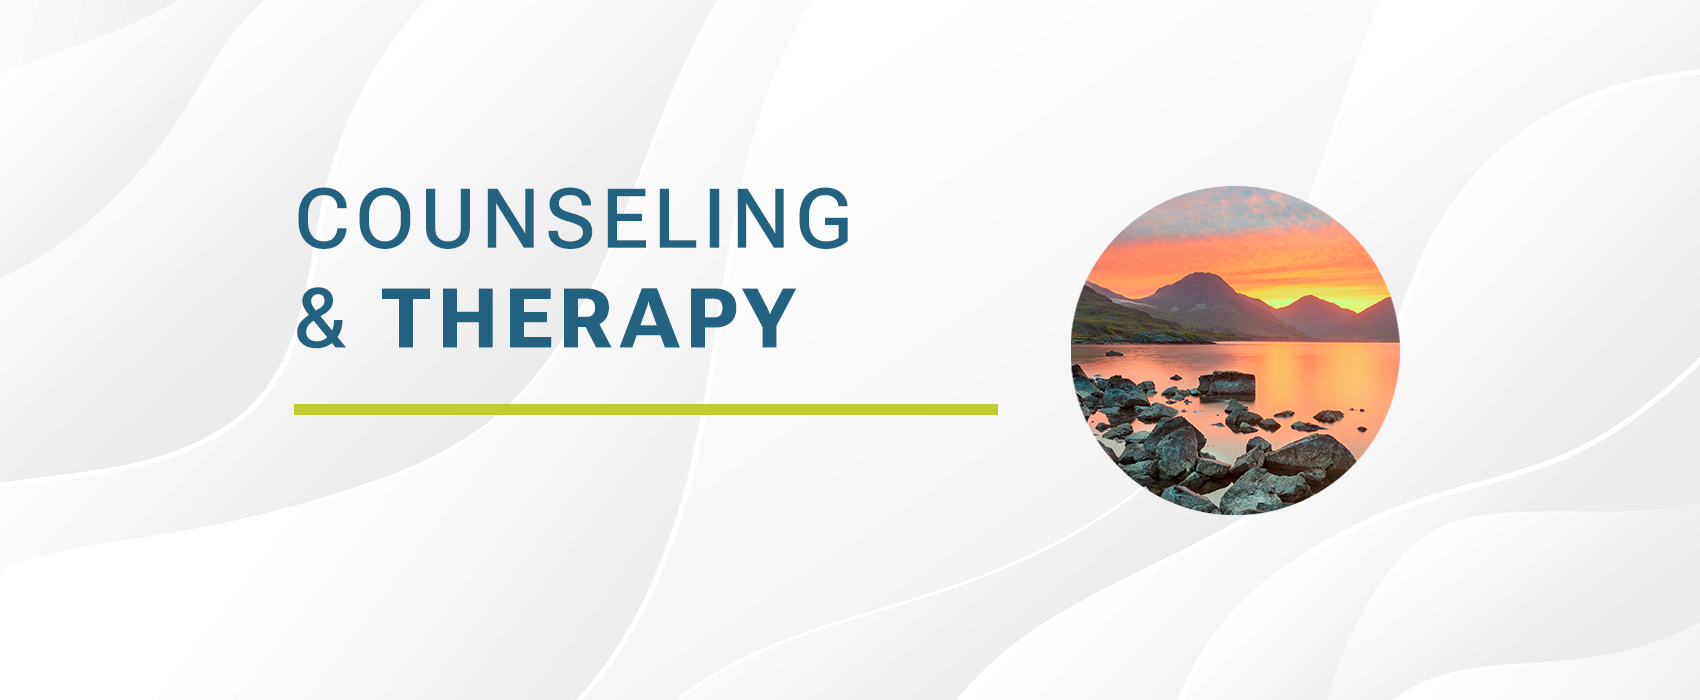 Counseling & Therapy Banner Image